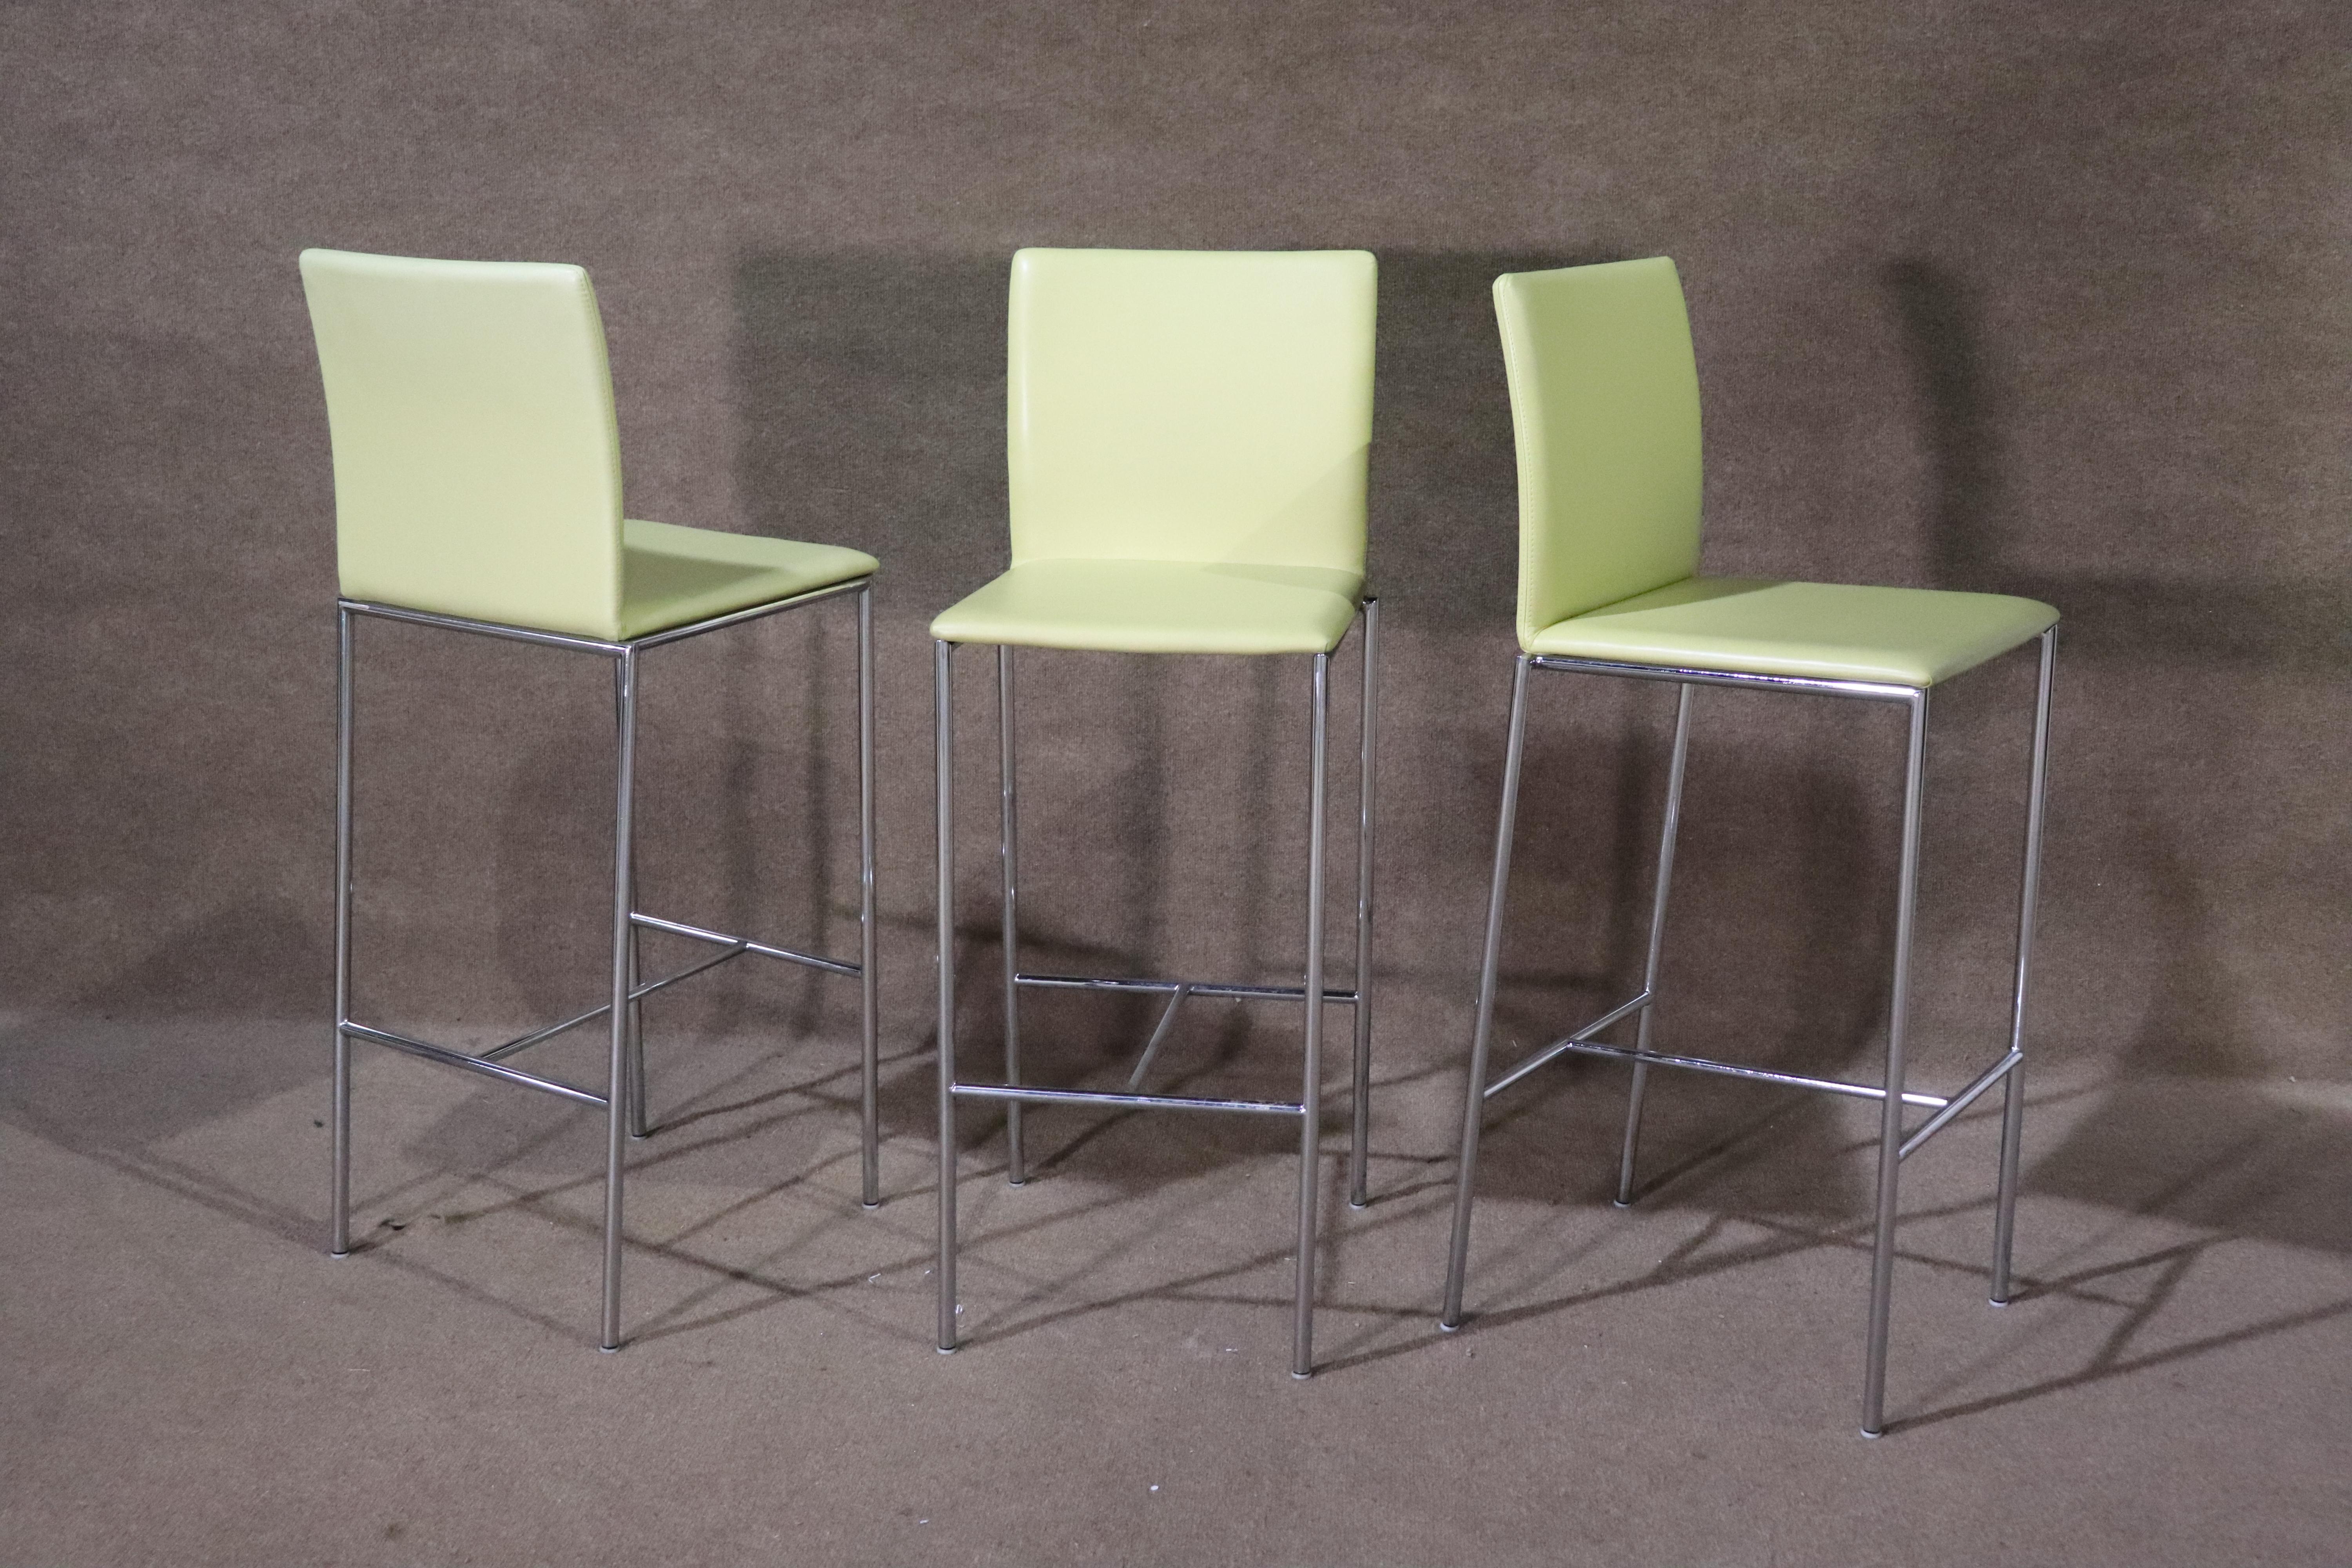 Set of three bar stools with slender polished chrome frames and soft cushions.
Please confirm location NY or NJ